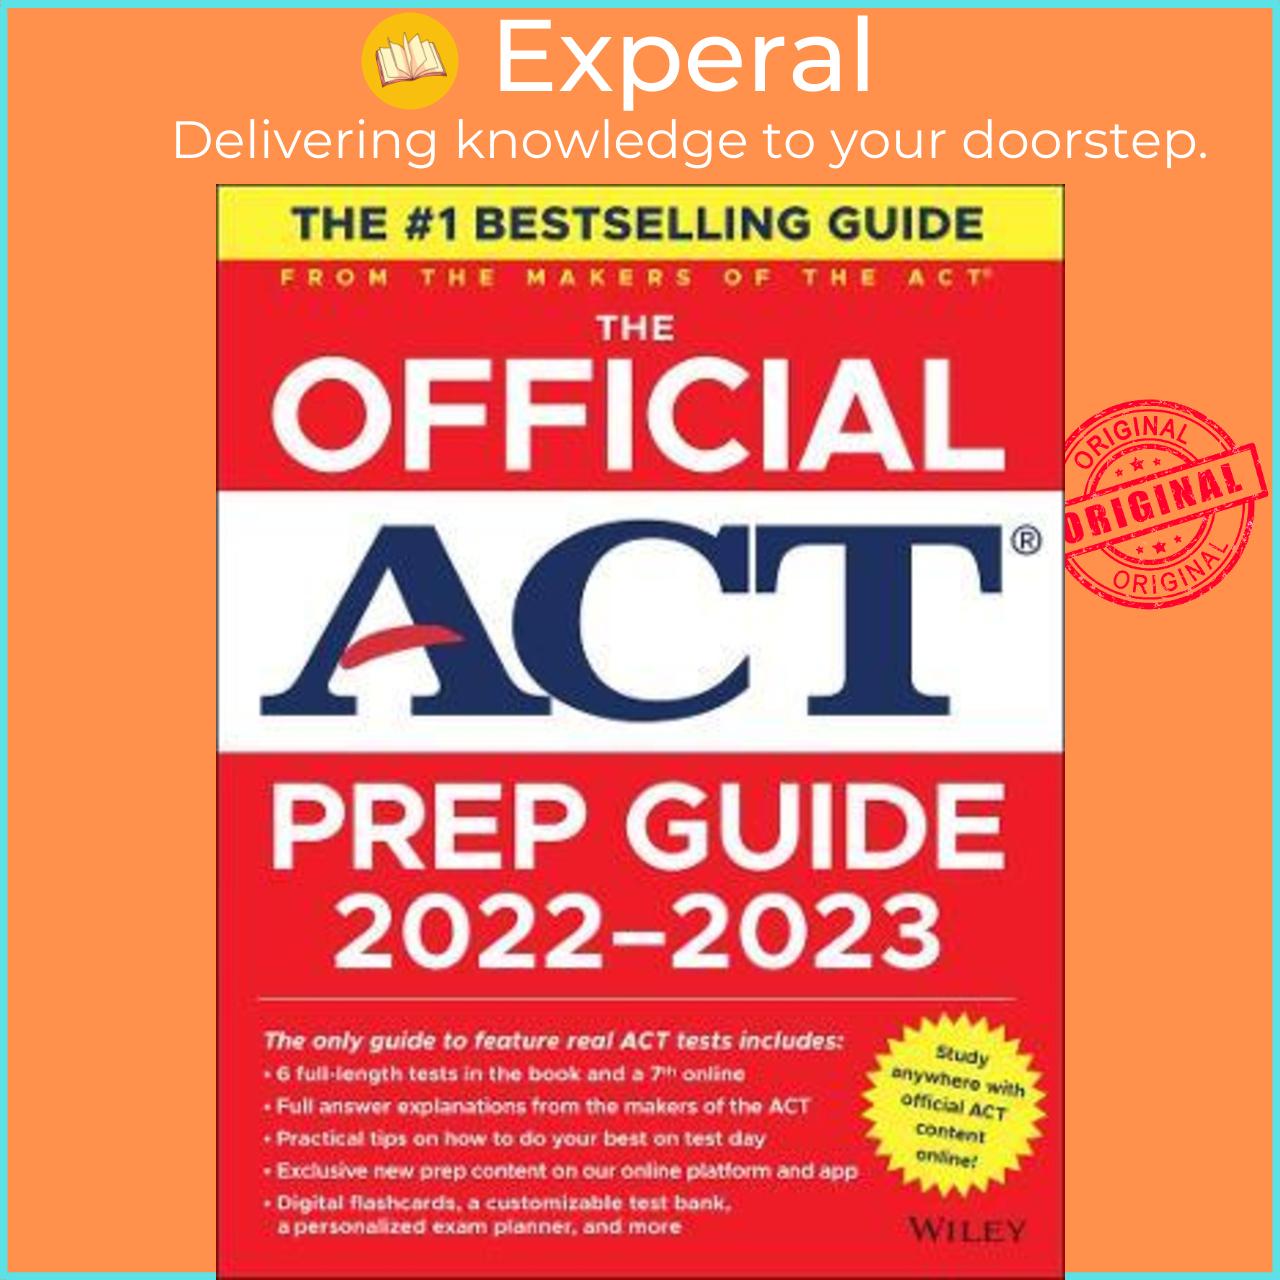 Sách - The Official ACT Prep Guide 2022-2023, (Book + Onl ine Course) by ACT (US edition, paperback)